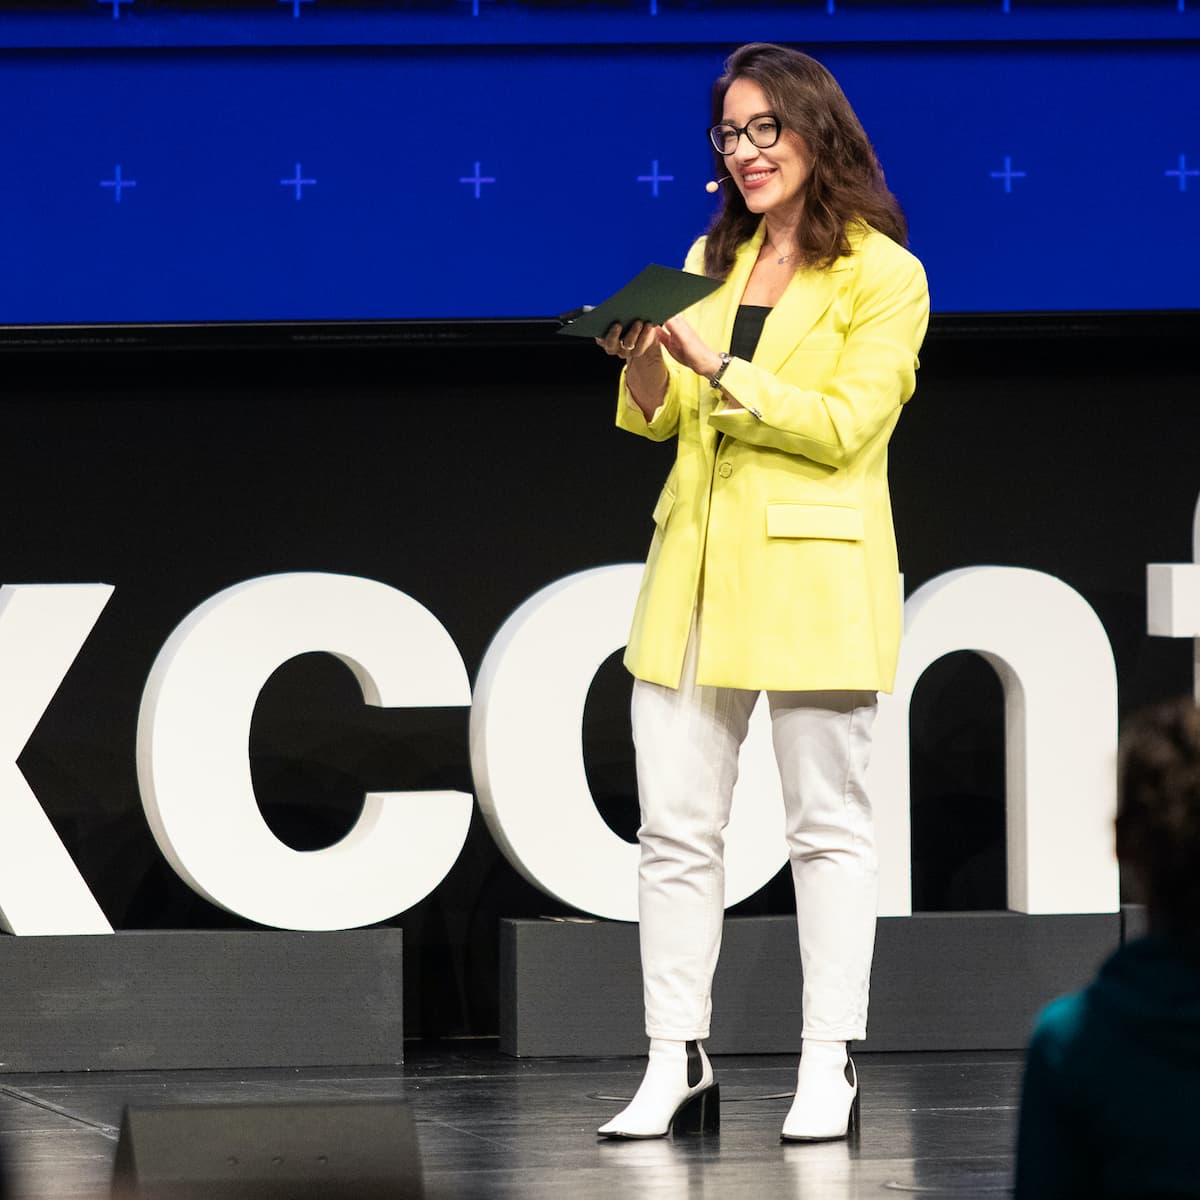 Young woman with long brown hair and glasses speaking on stage of ux conference